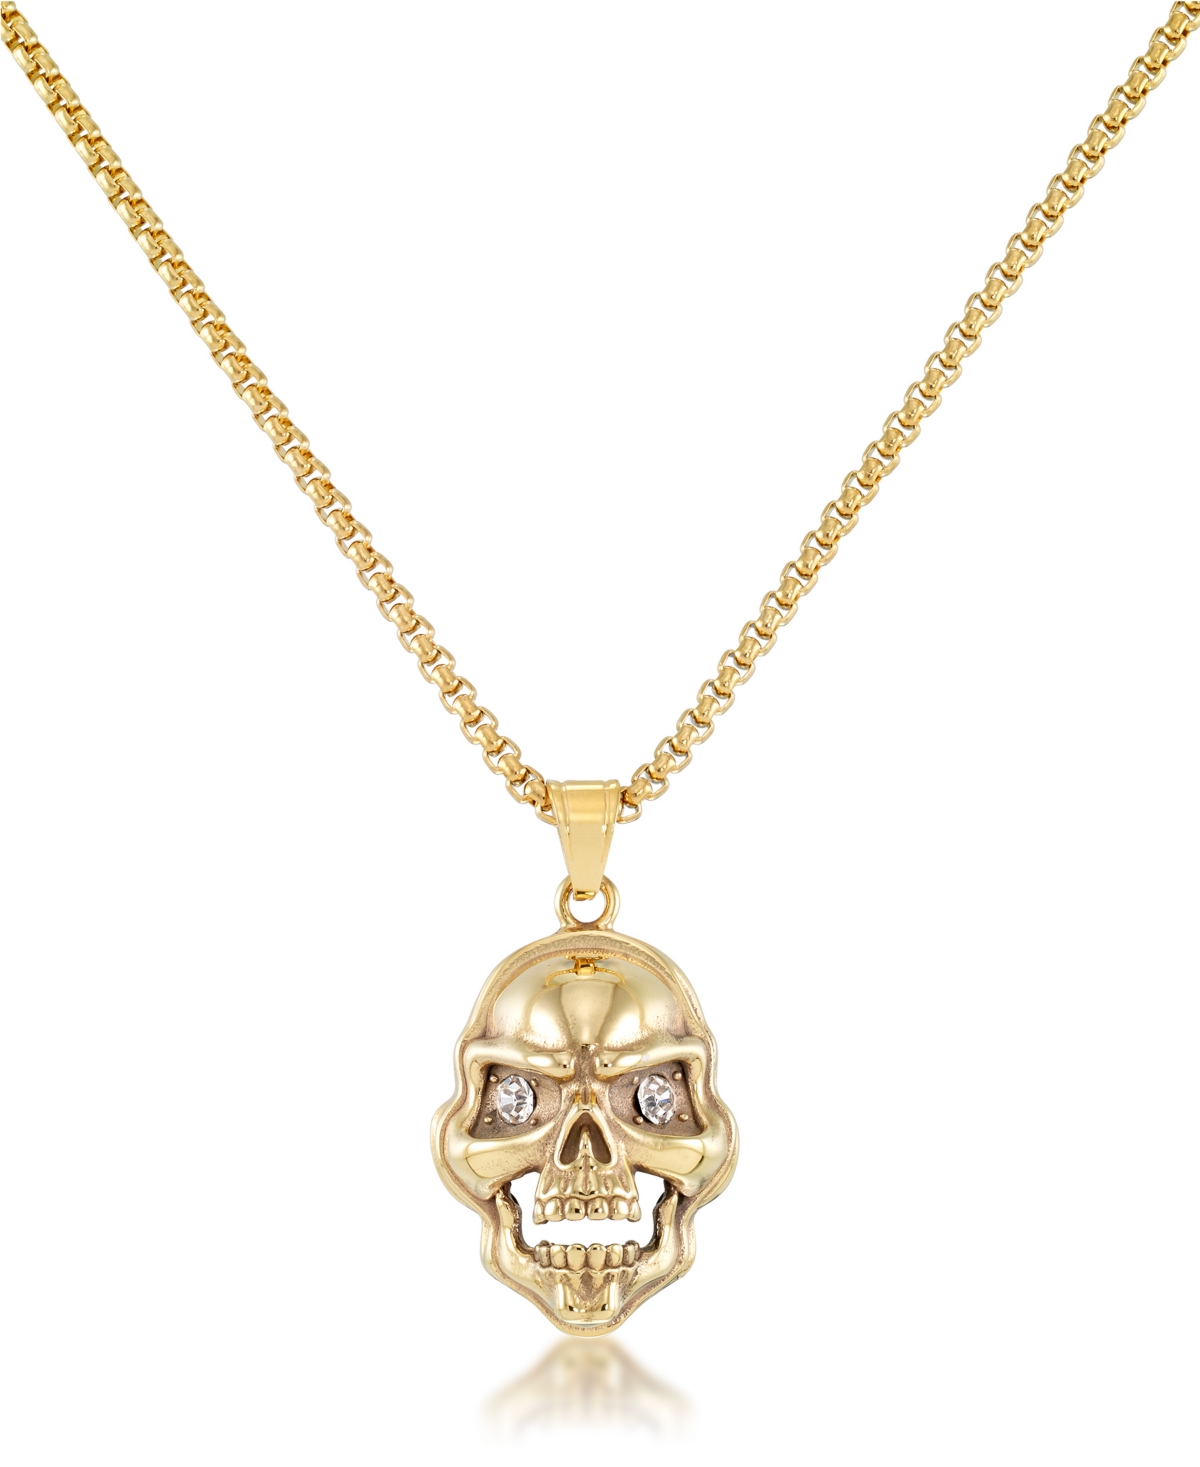 Men's Cubic Zirconia Signature Skull 24" Pendant Necklace in Black Ion-Plated Stainless Steel (Also available in Gold-